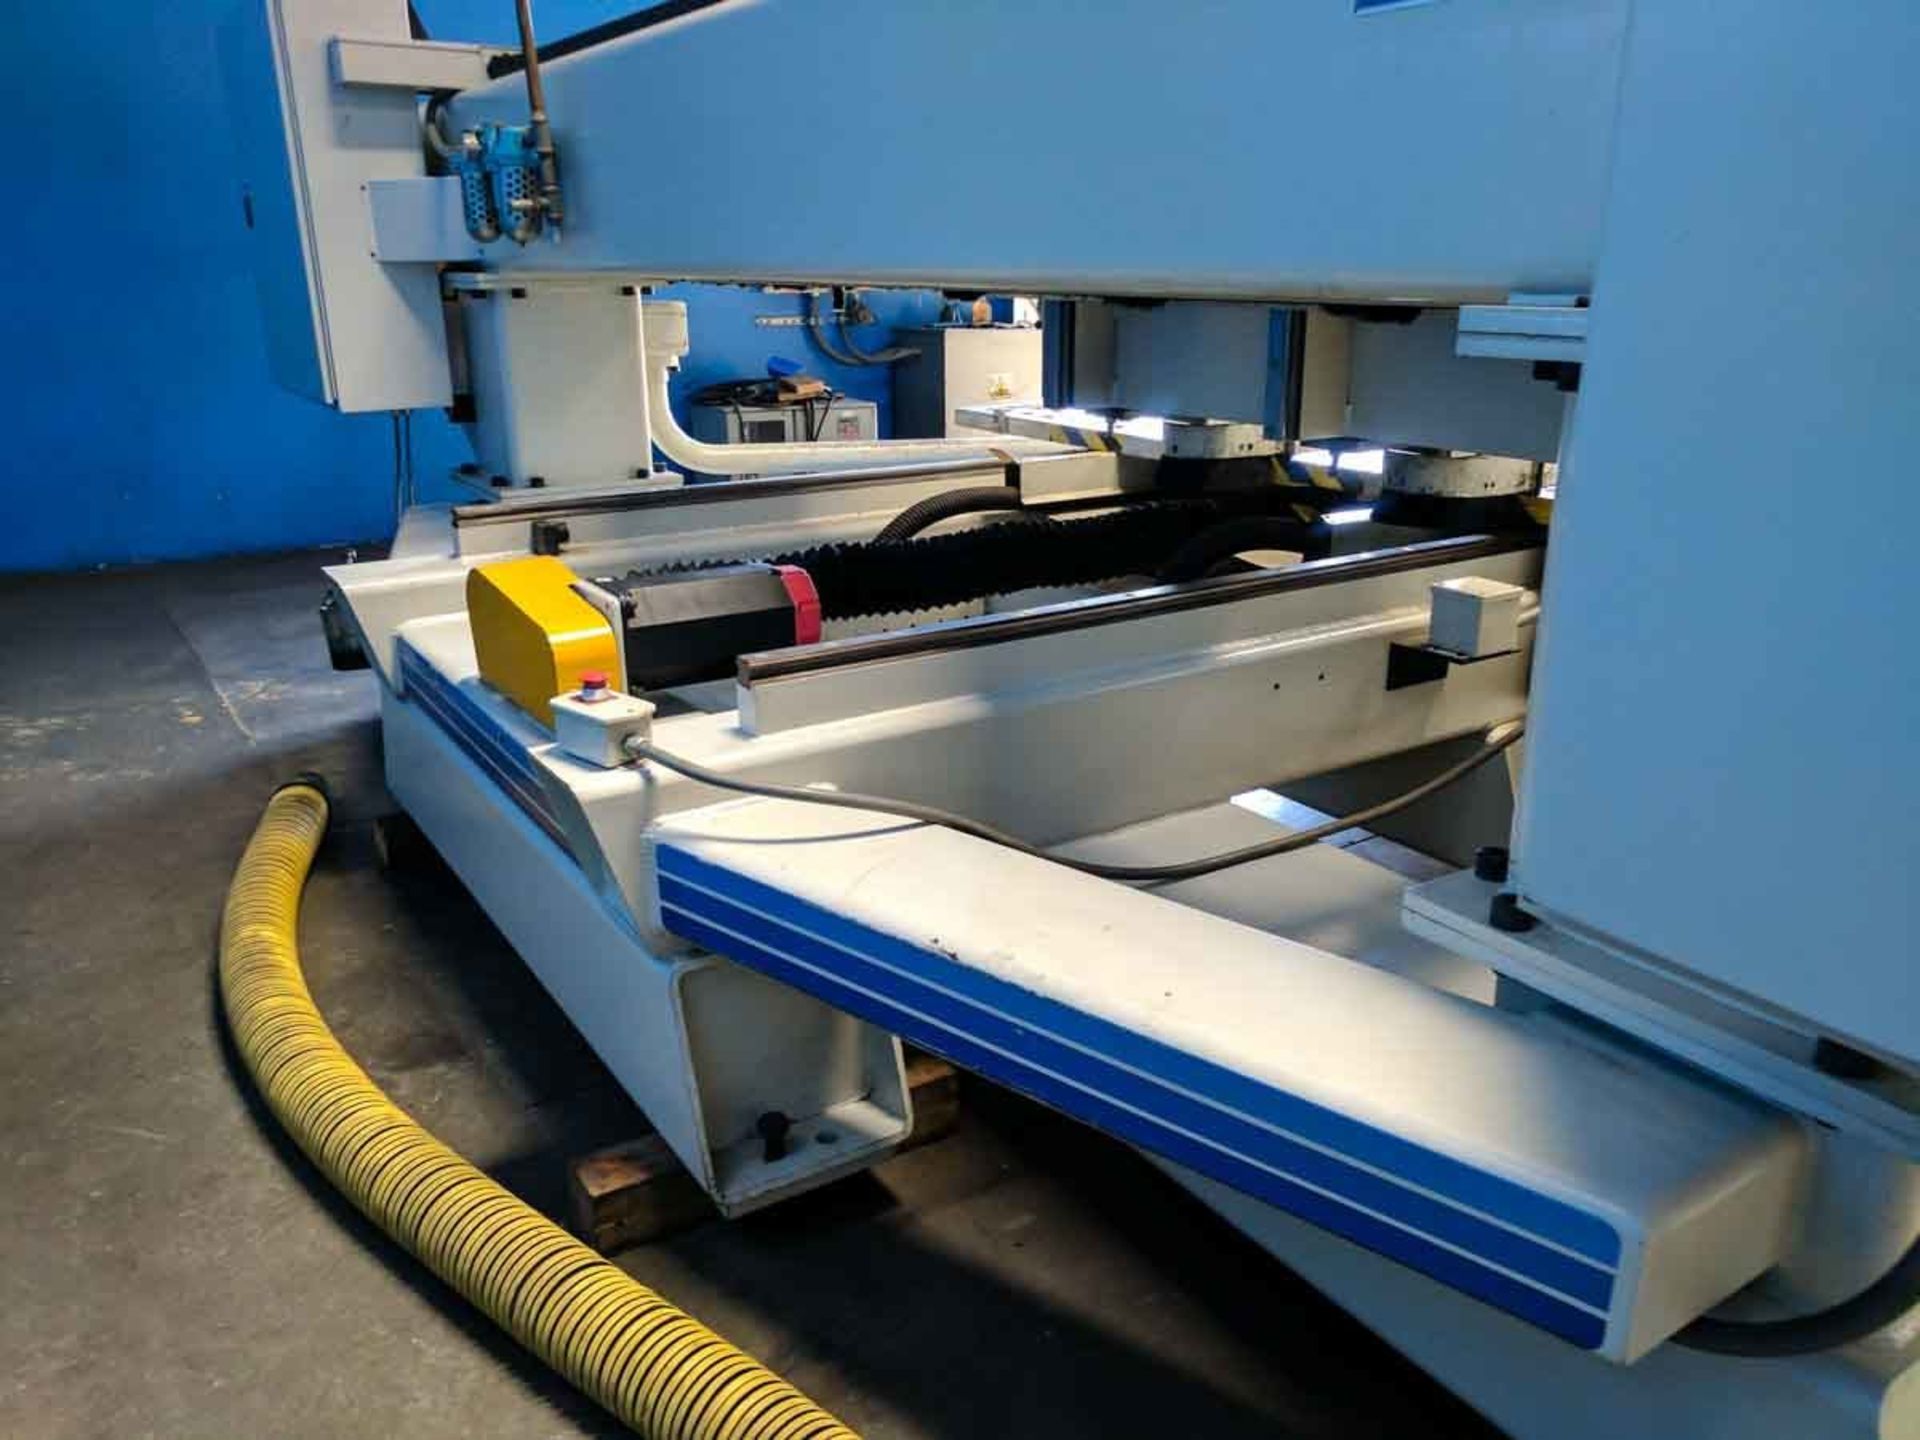 Komo VR805Q Fanuc CNC Metal Router 3 Axis 4 Spindle 96" x 60" Sheet Size - Located In: Huntington - Image 25 of 25